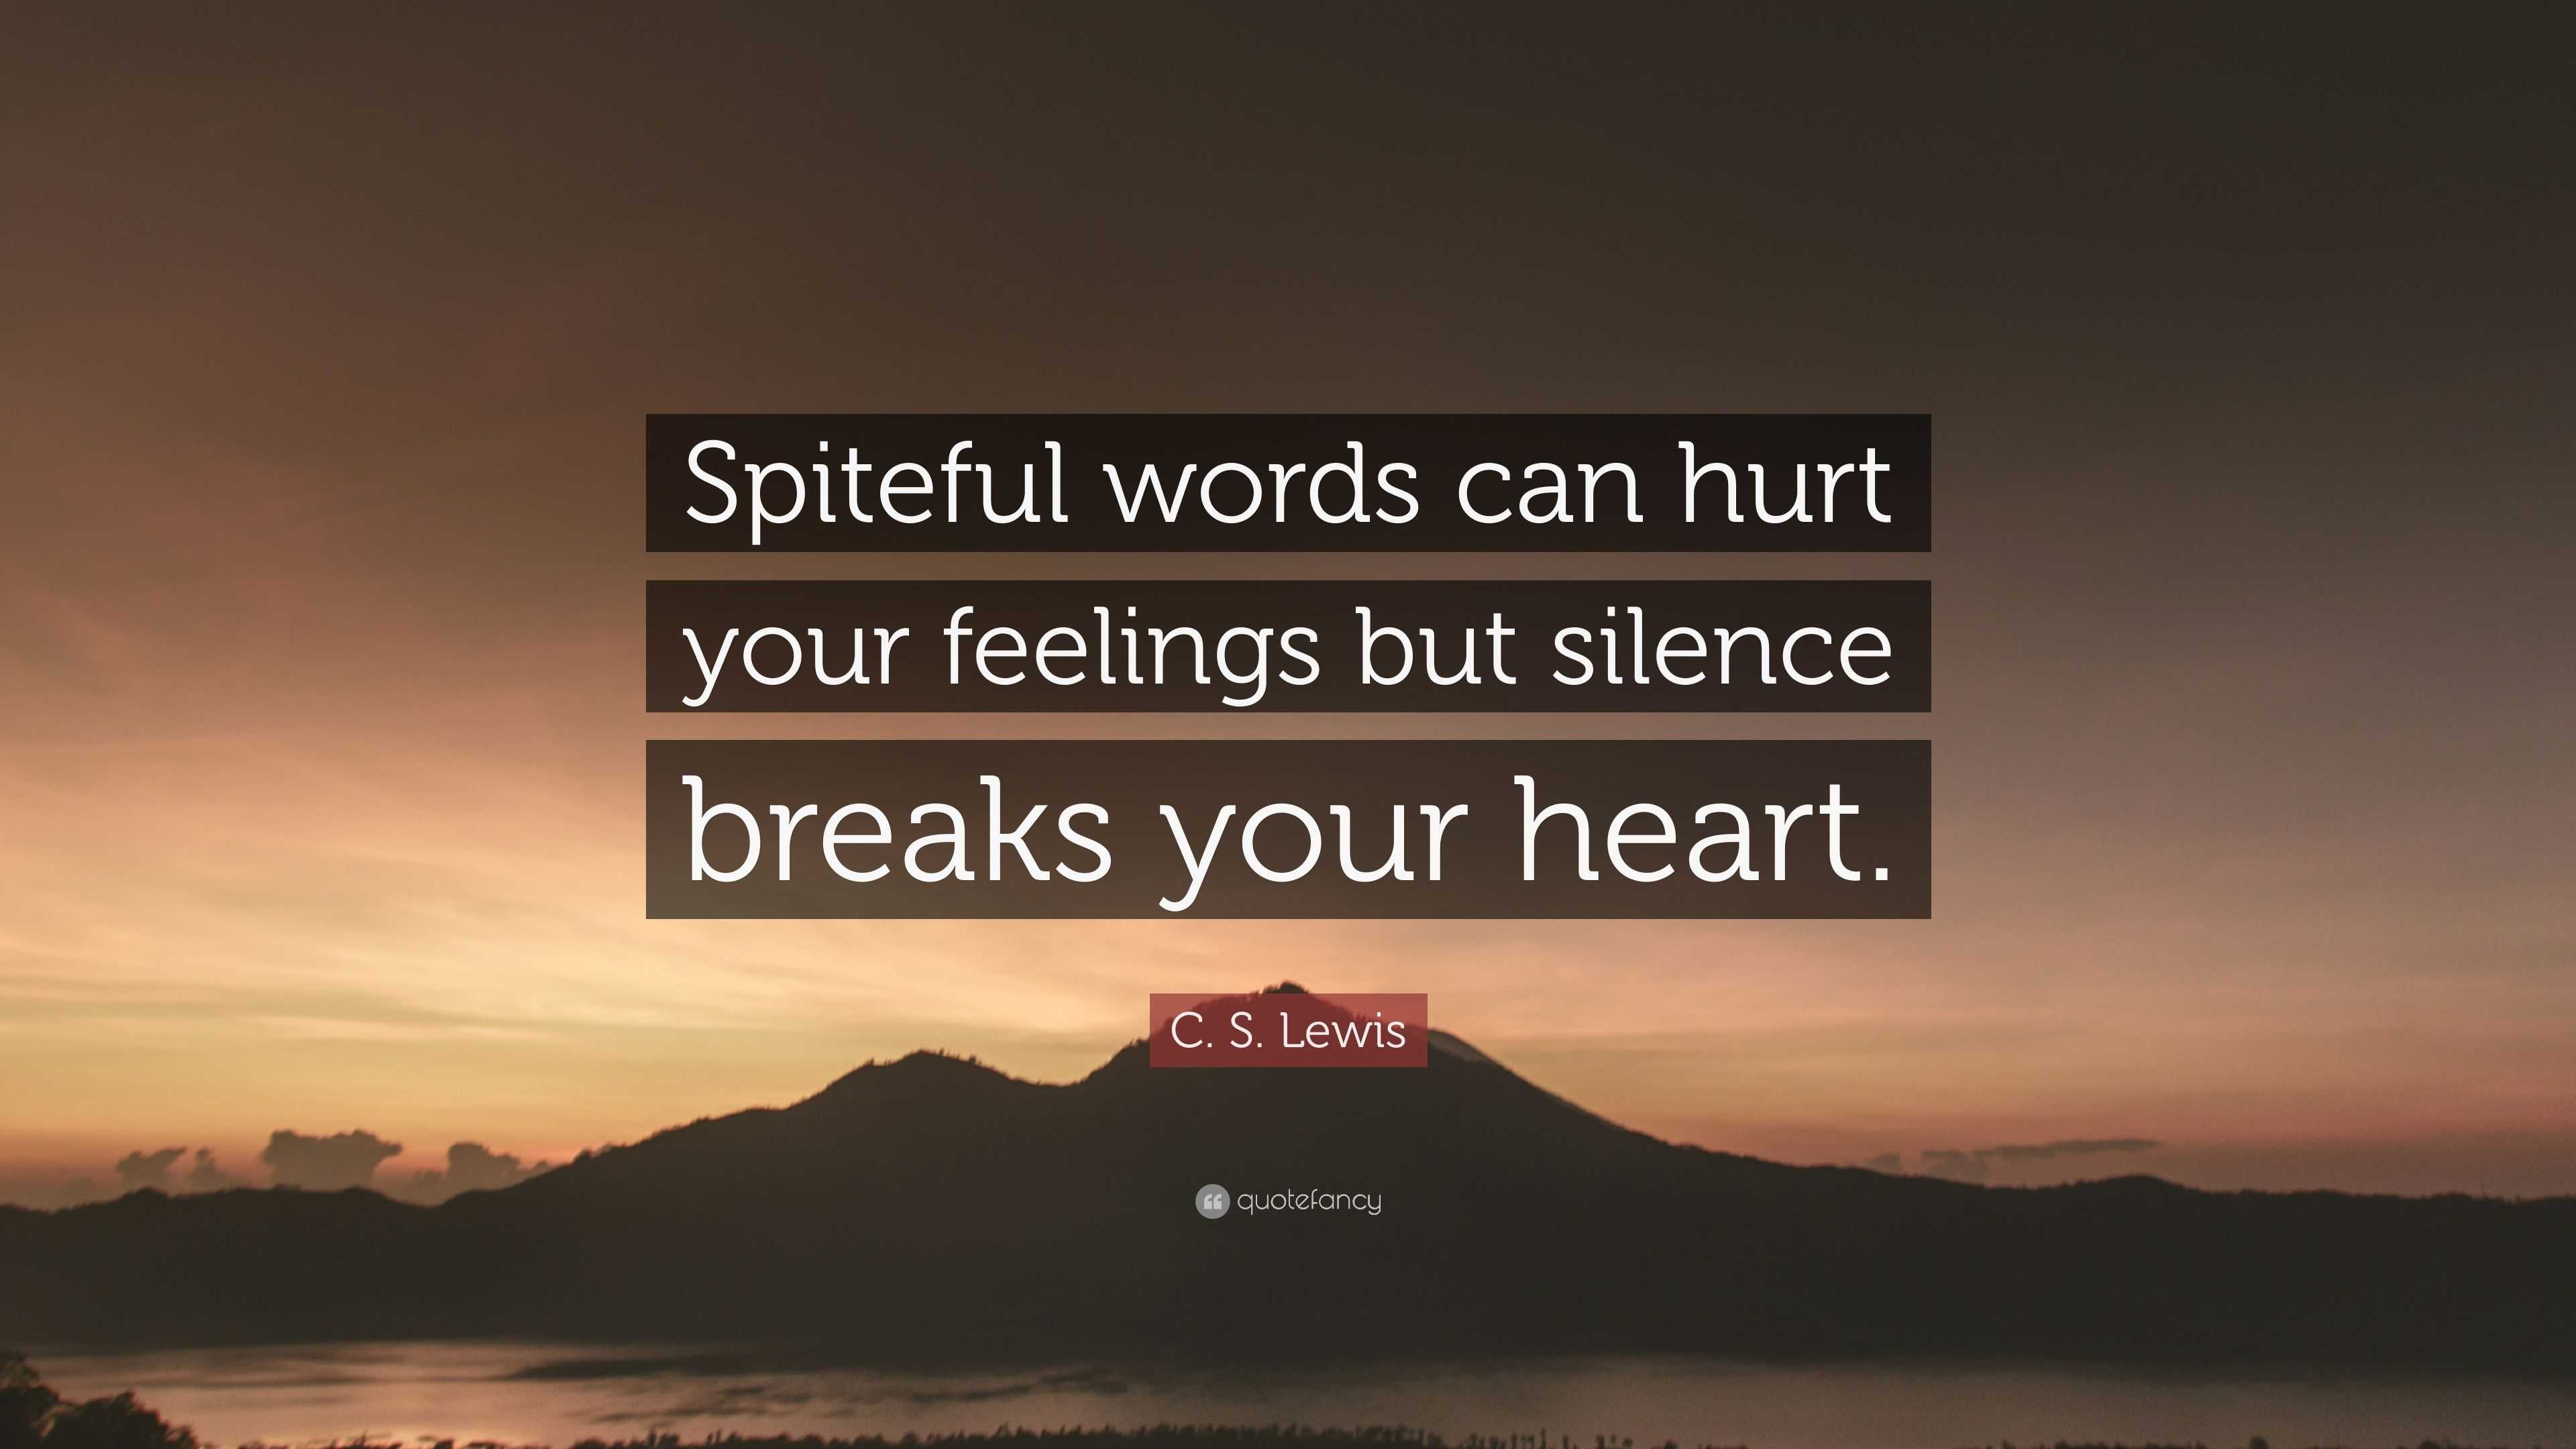 C. S. Lewis Quote: “Spiteful words can hurt your feelings but silence